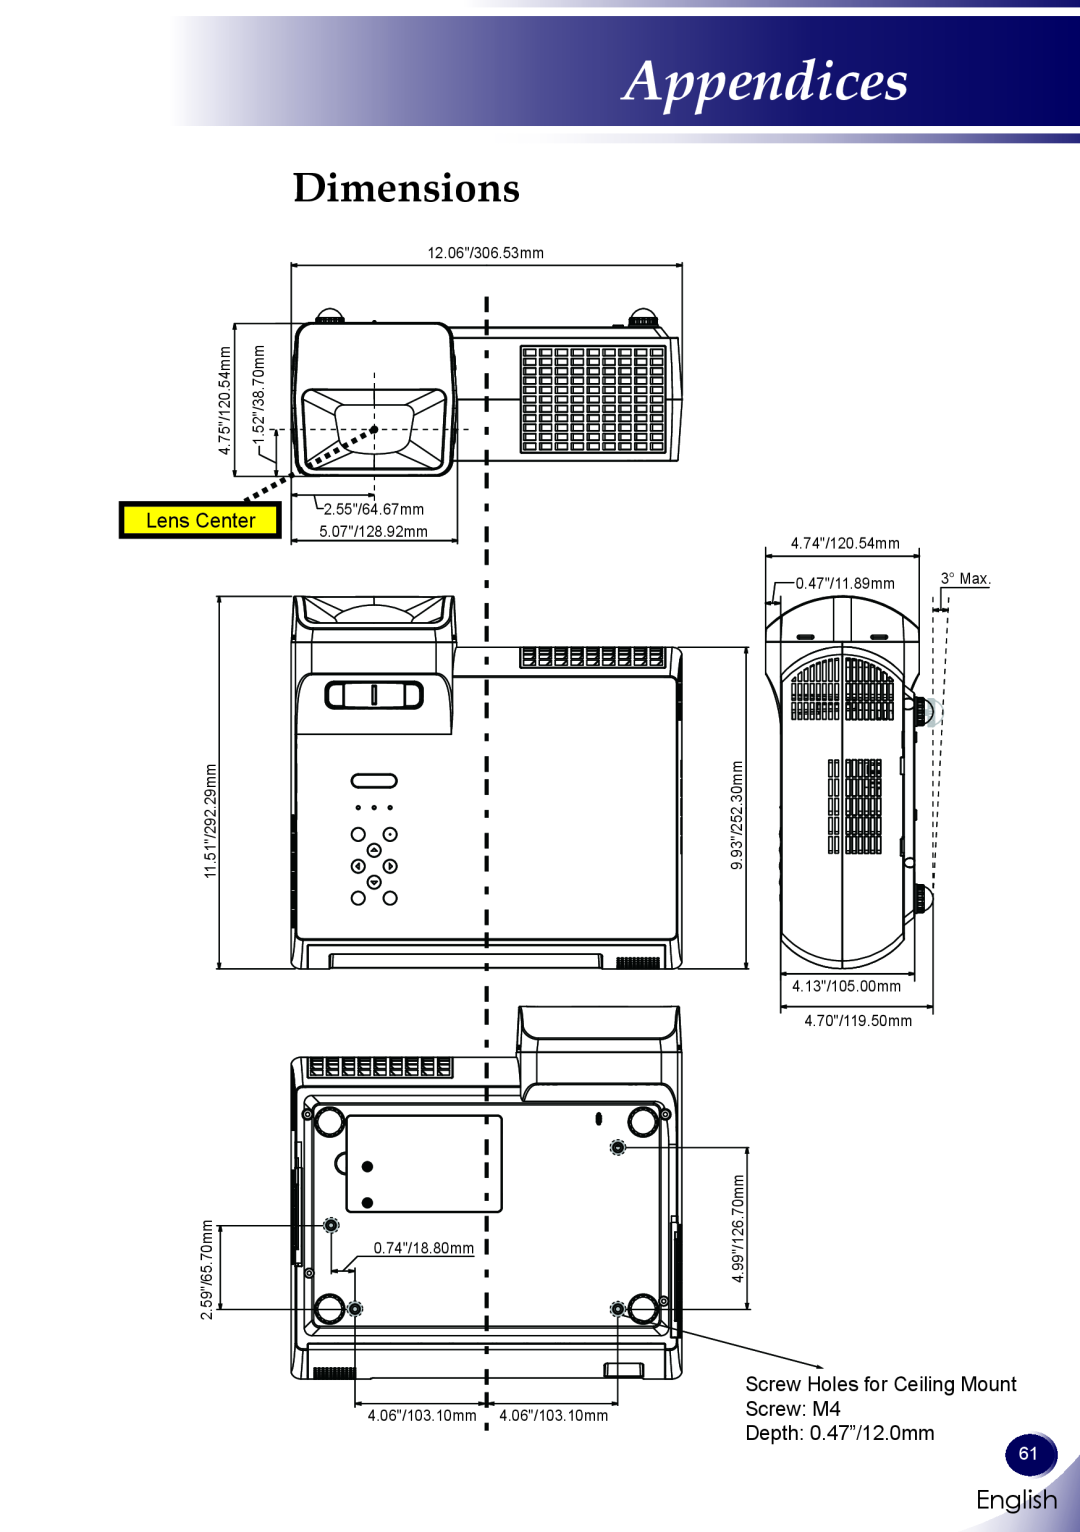 Sanyo PDG-DXL100 owner manual Dimensions, Appendices, English, Screw Holes for Ceiling Mount 